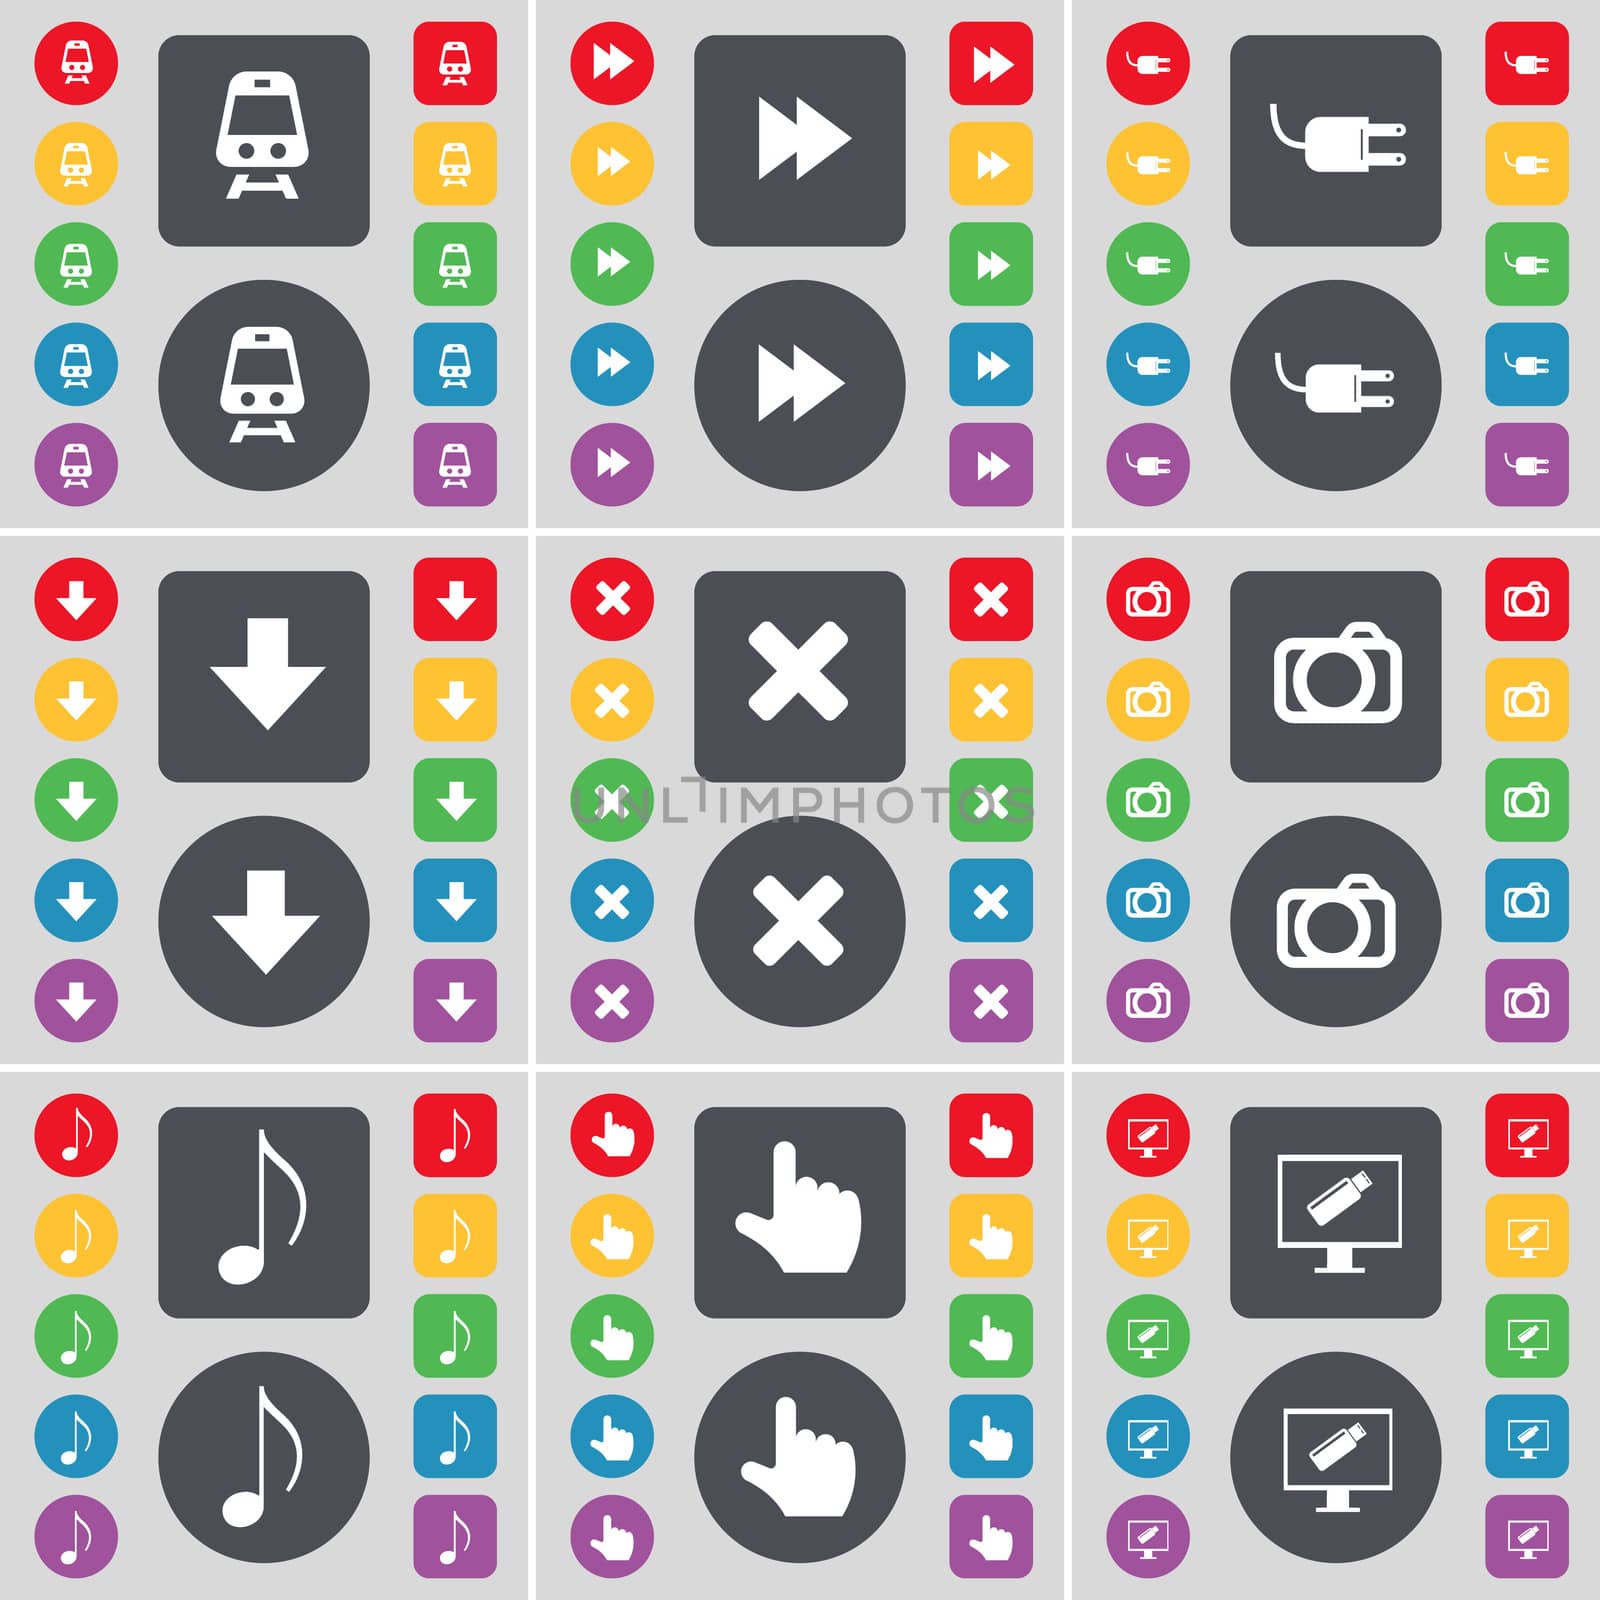 Train, Rewind, Socket, Arrow down, Stop, Camera, Note, Hand, Monitor icon symbol. A large set of flat, colored buttons for your design. illustration